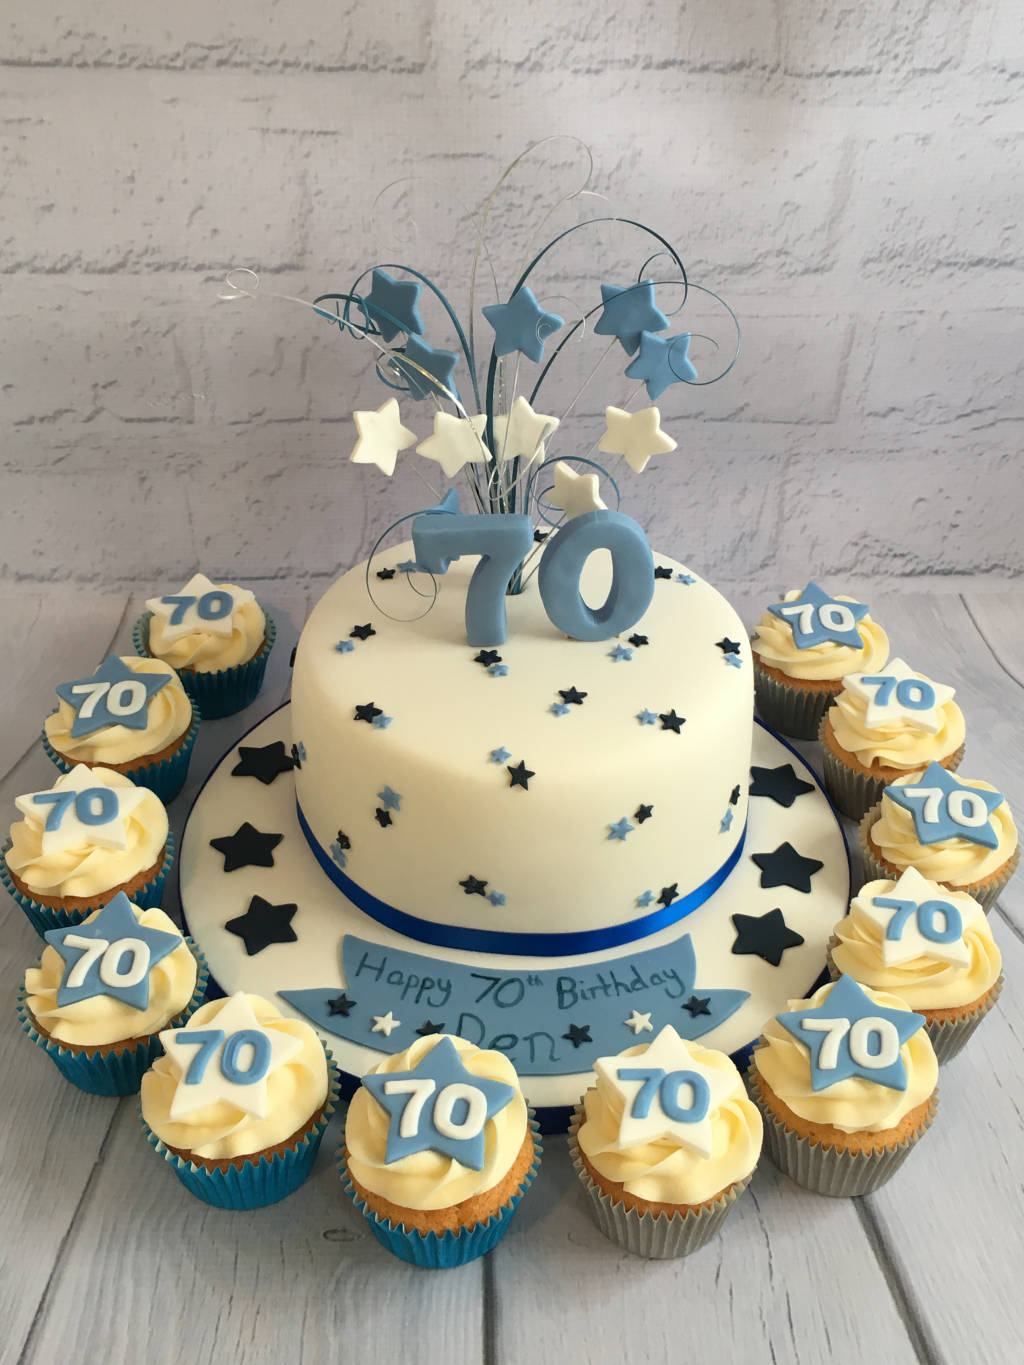 70-star-cake-with-matching-cupcakes